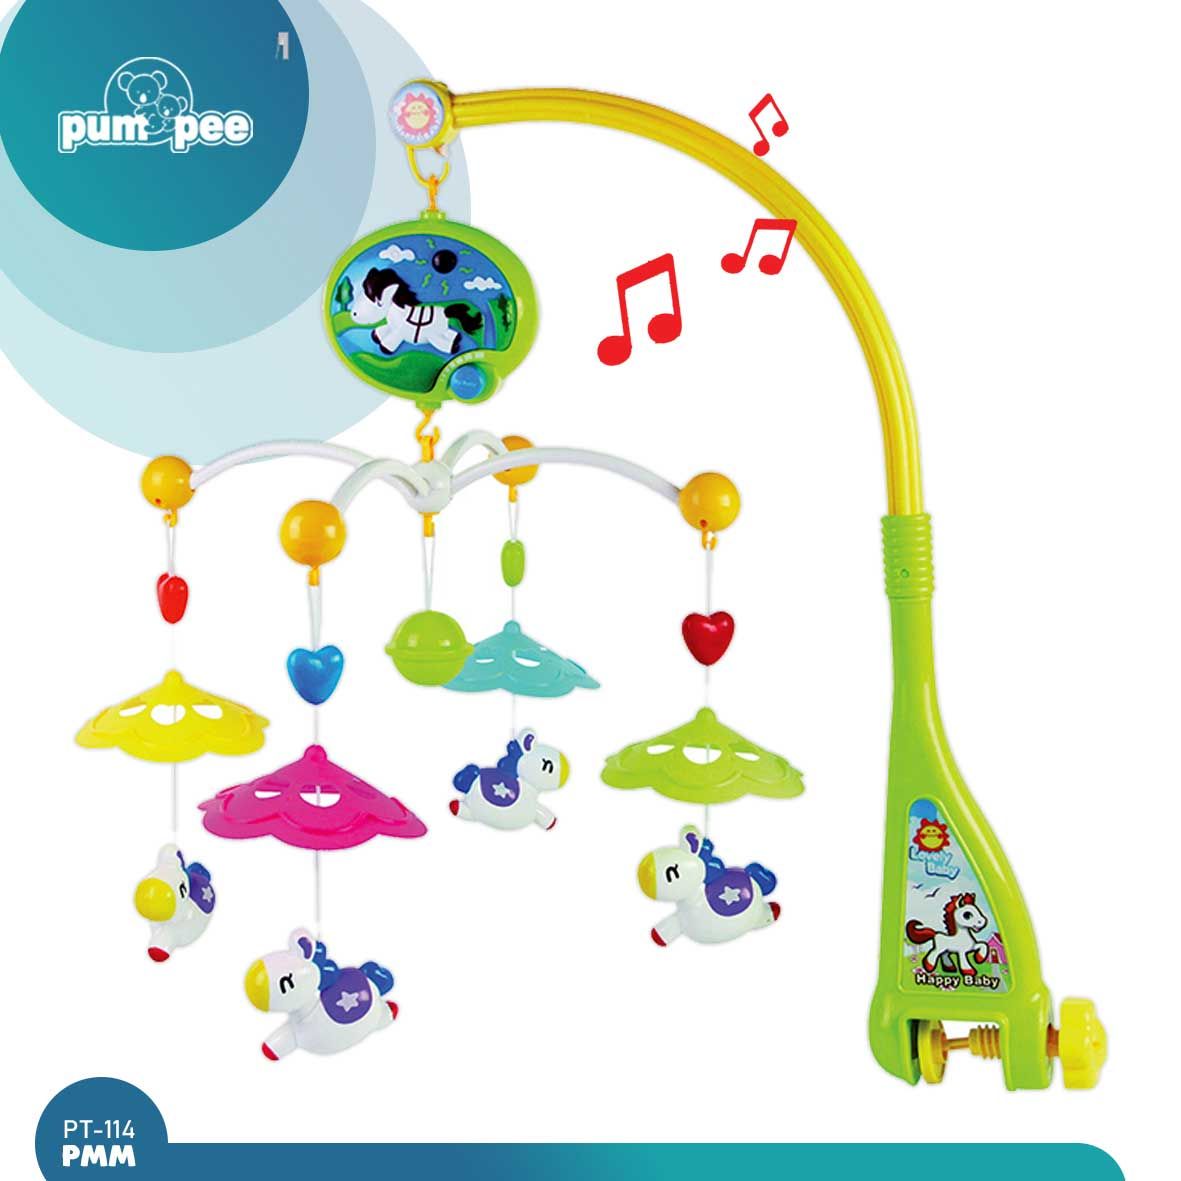 Pumpee Pony Musical Mobile | PT-114PMM - 1